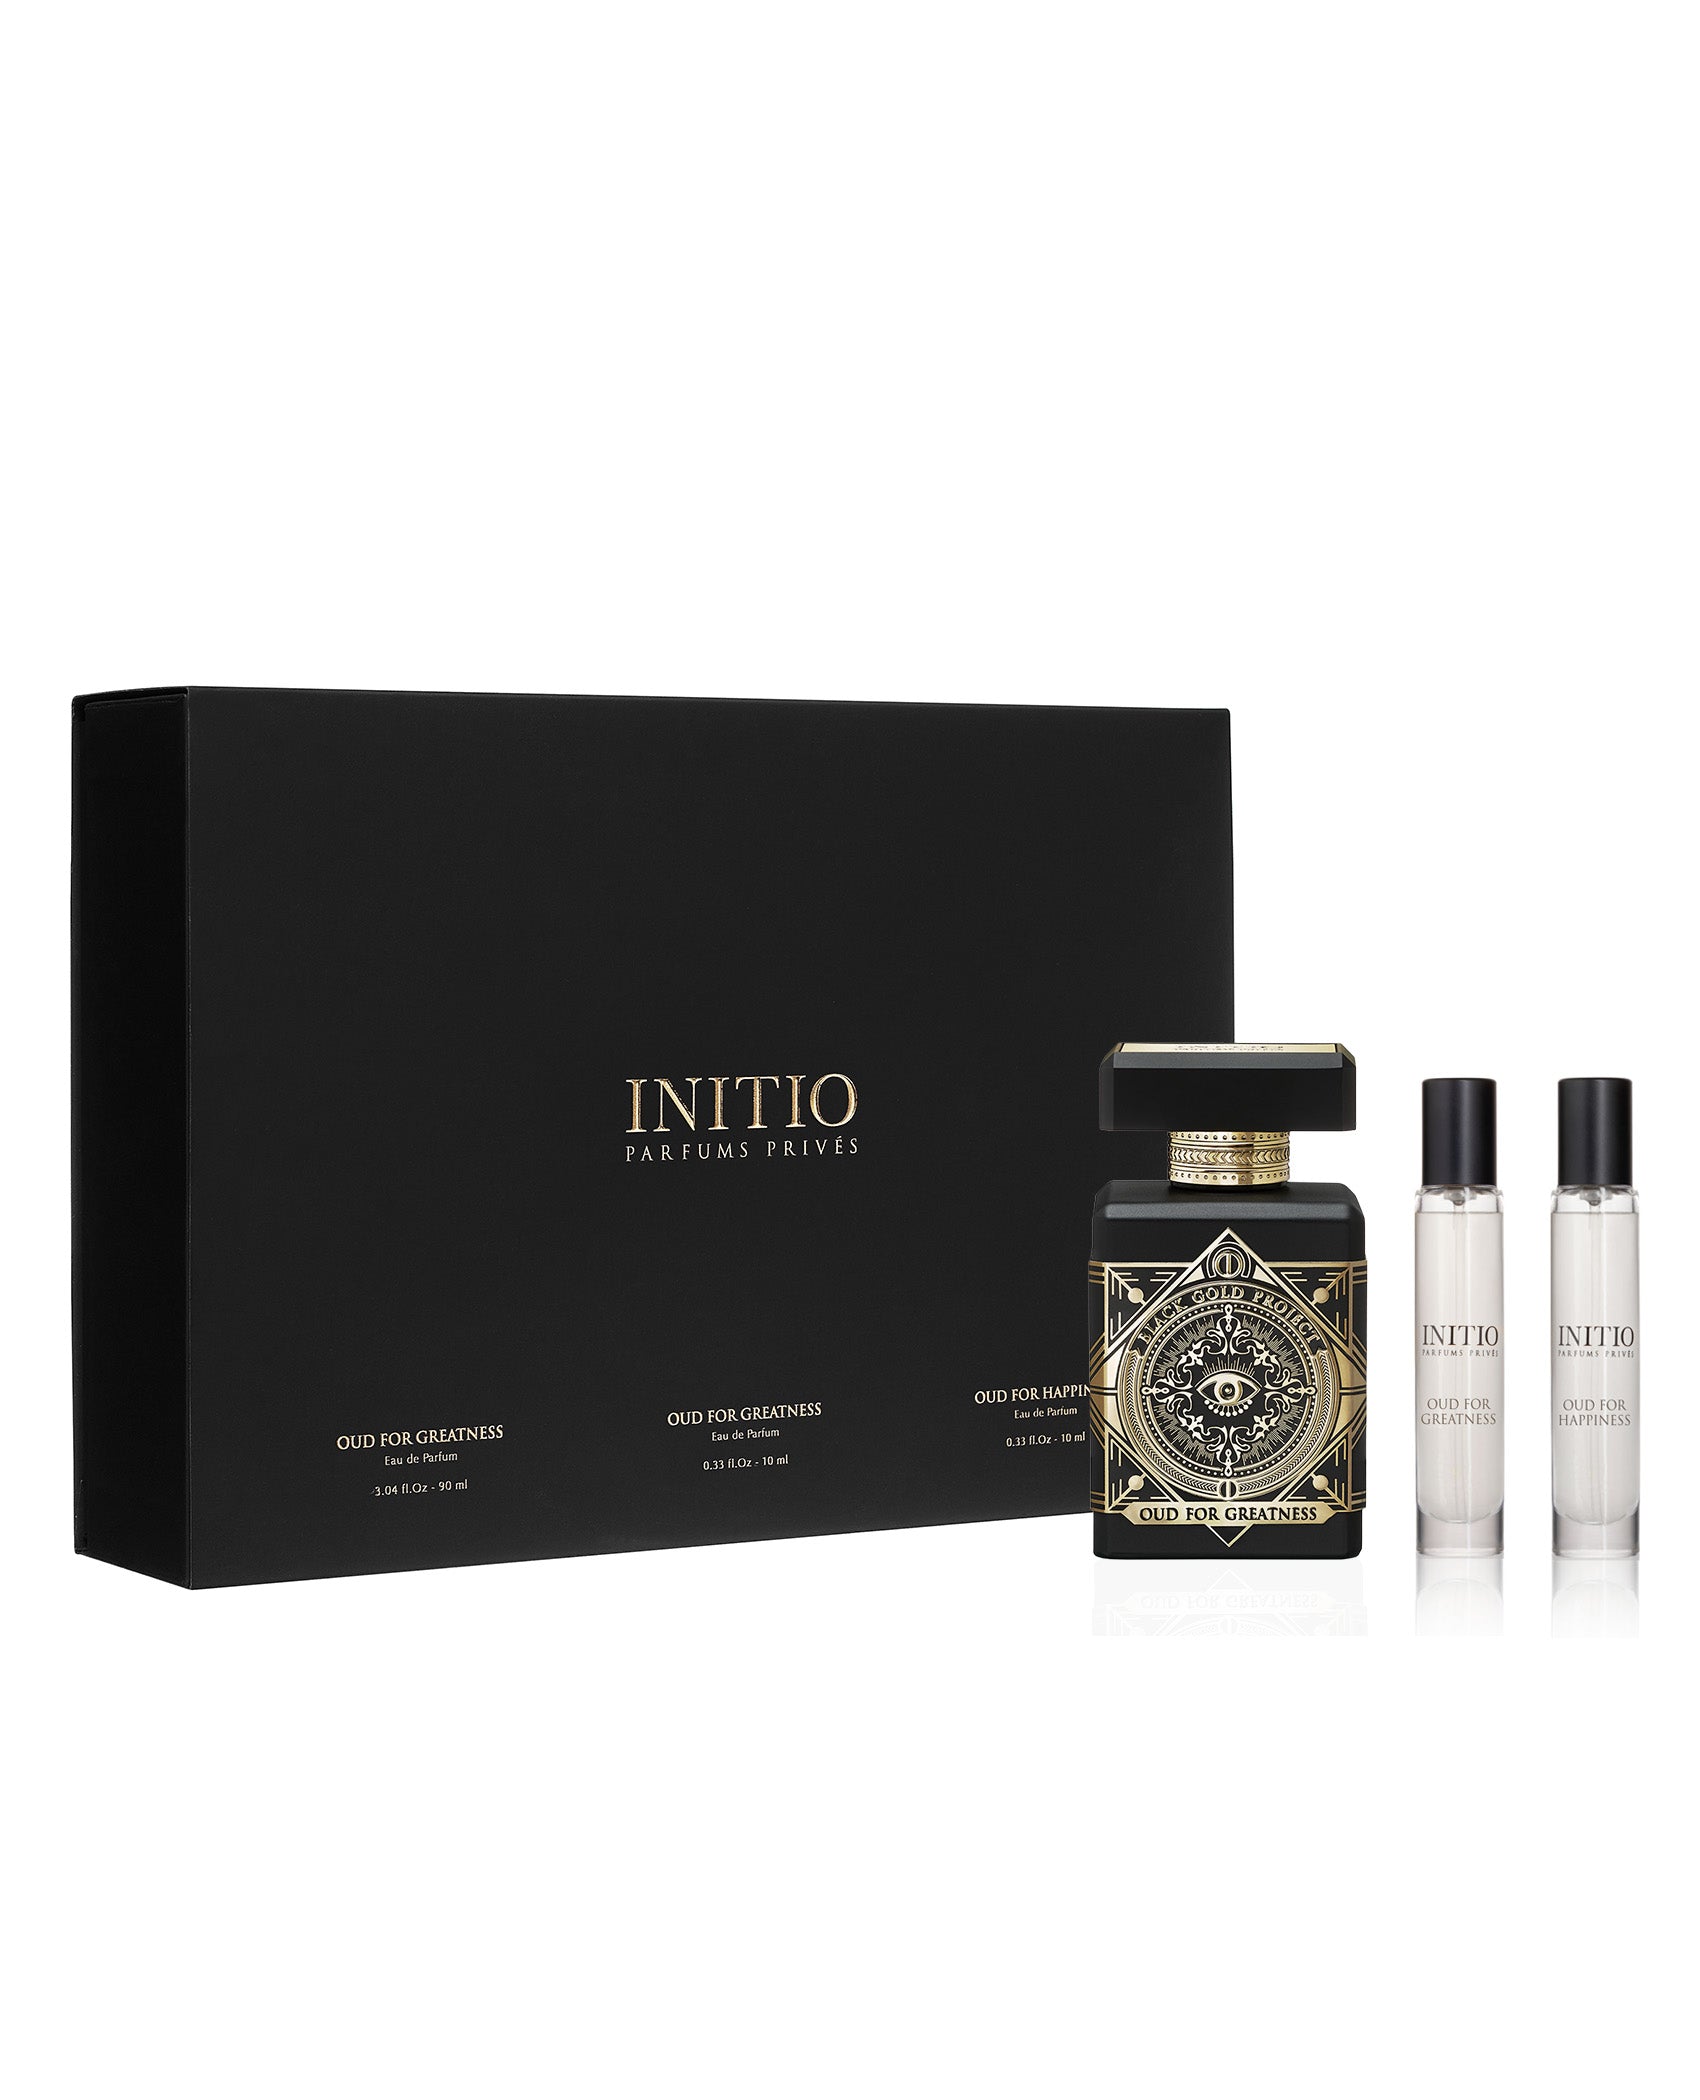 OUD FOR GREATNESS LIMITED – SET Privés Parfums US EDITION INITIO